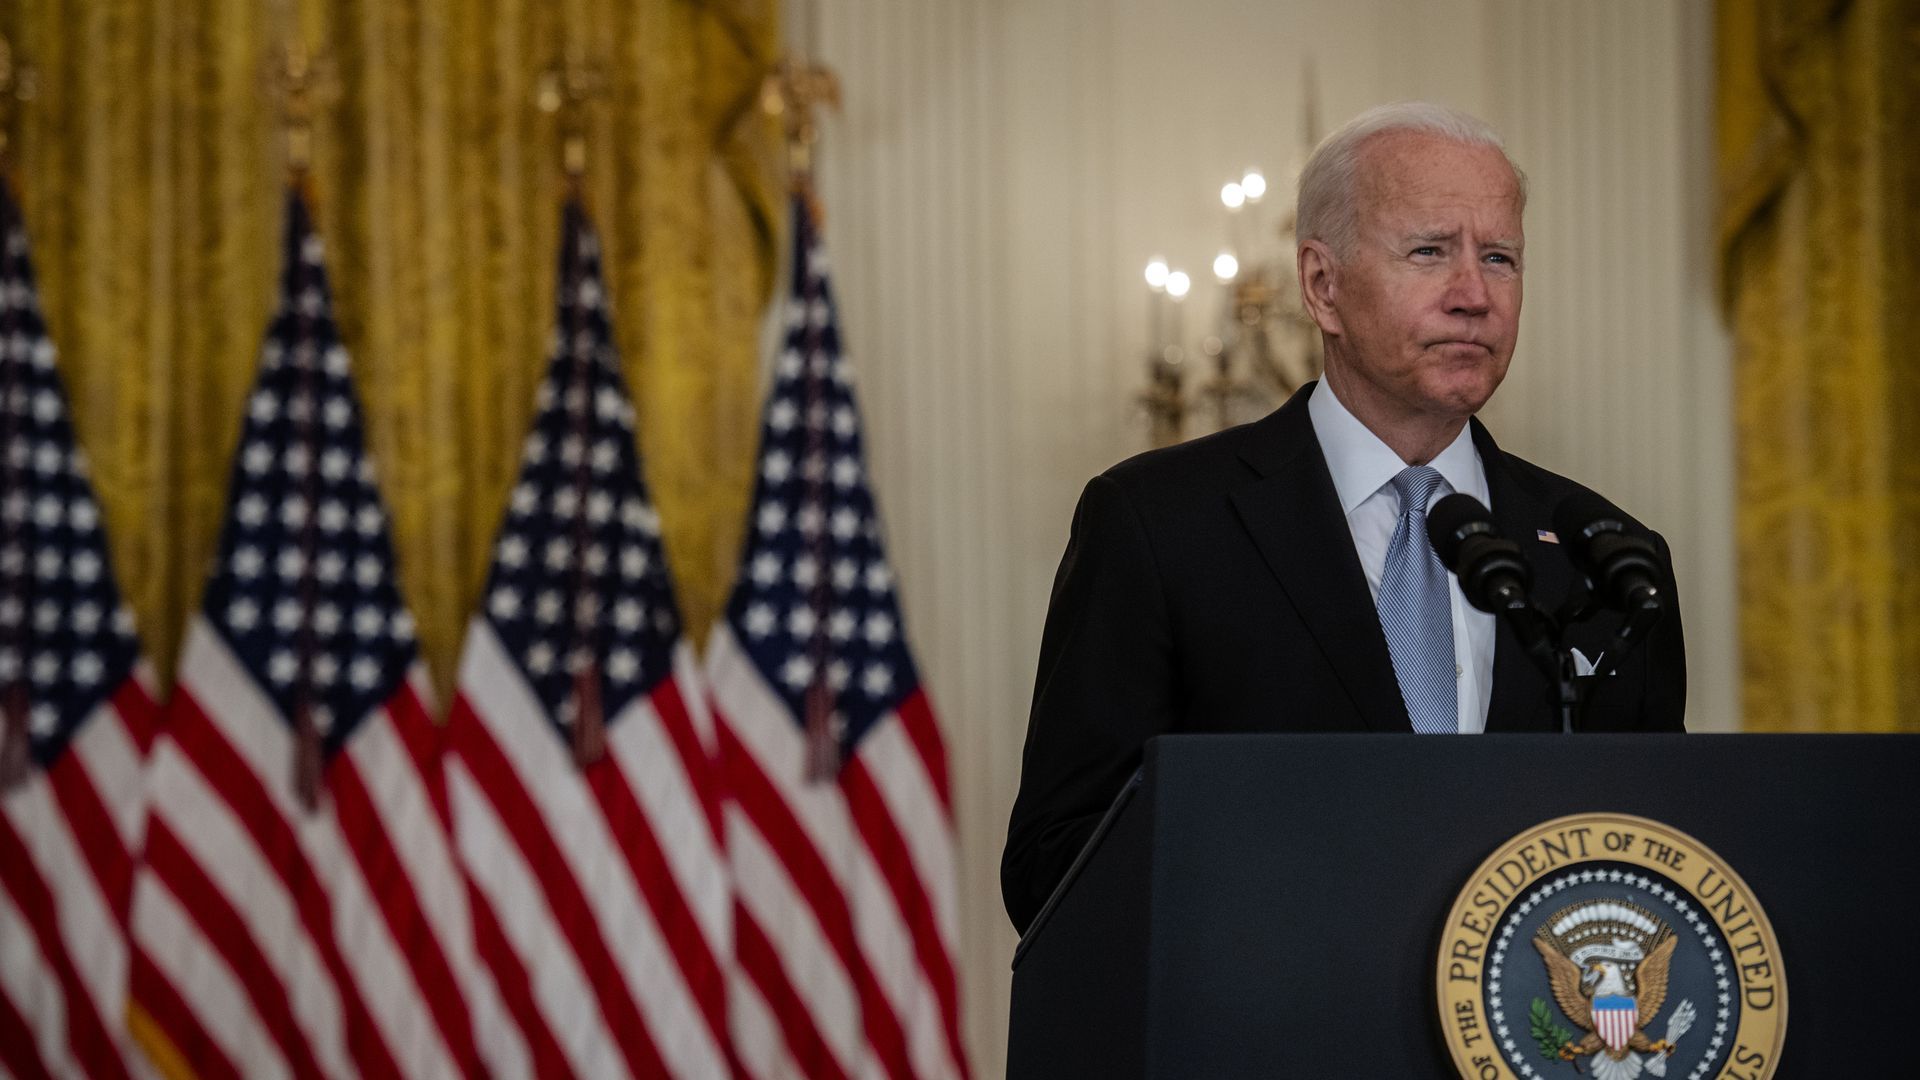 Biden speaking during a press conference Tuesday.